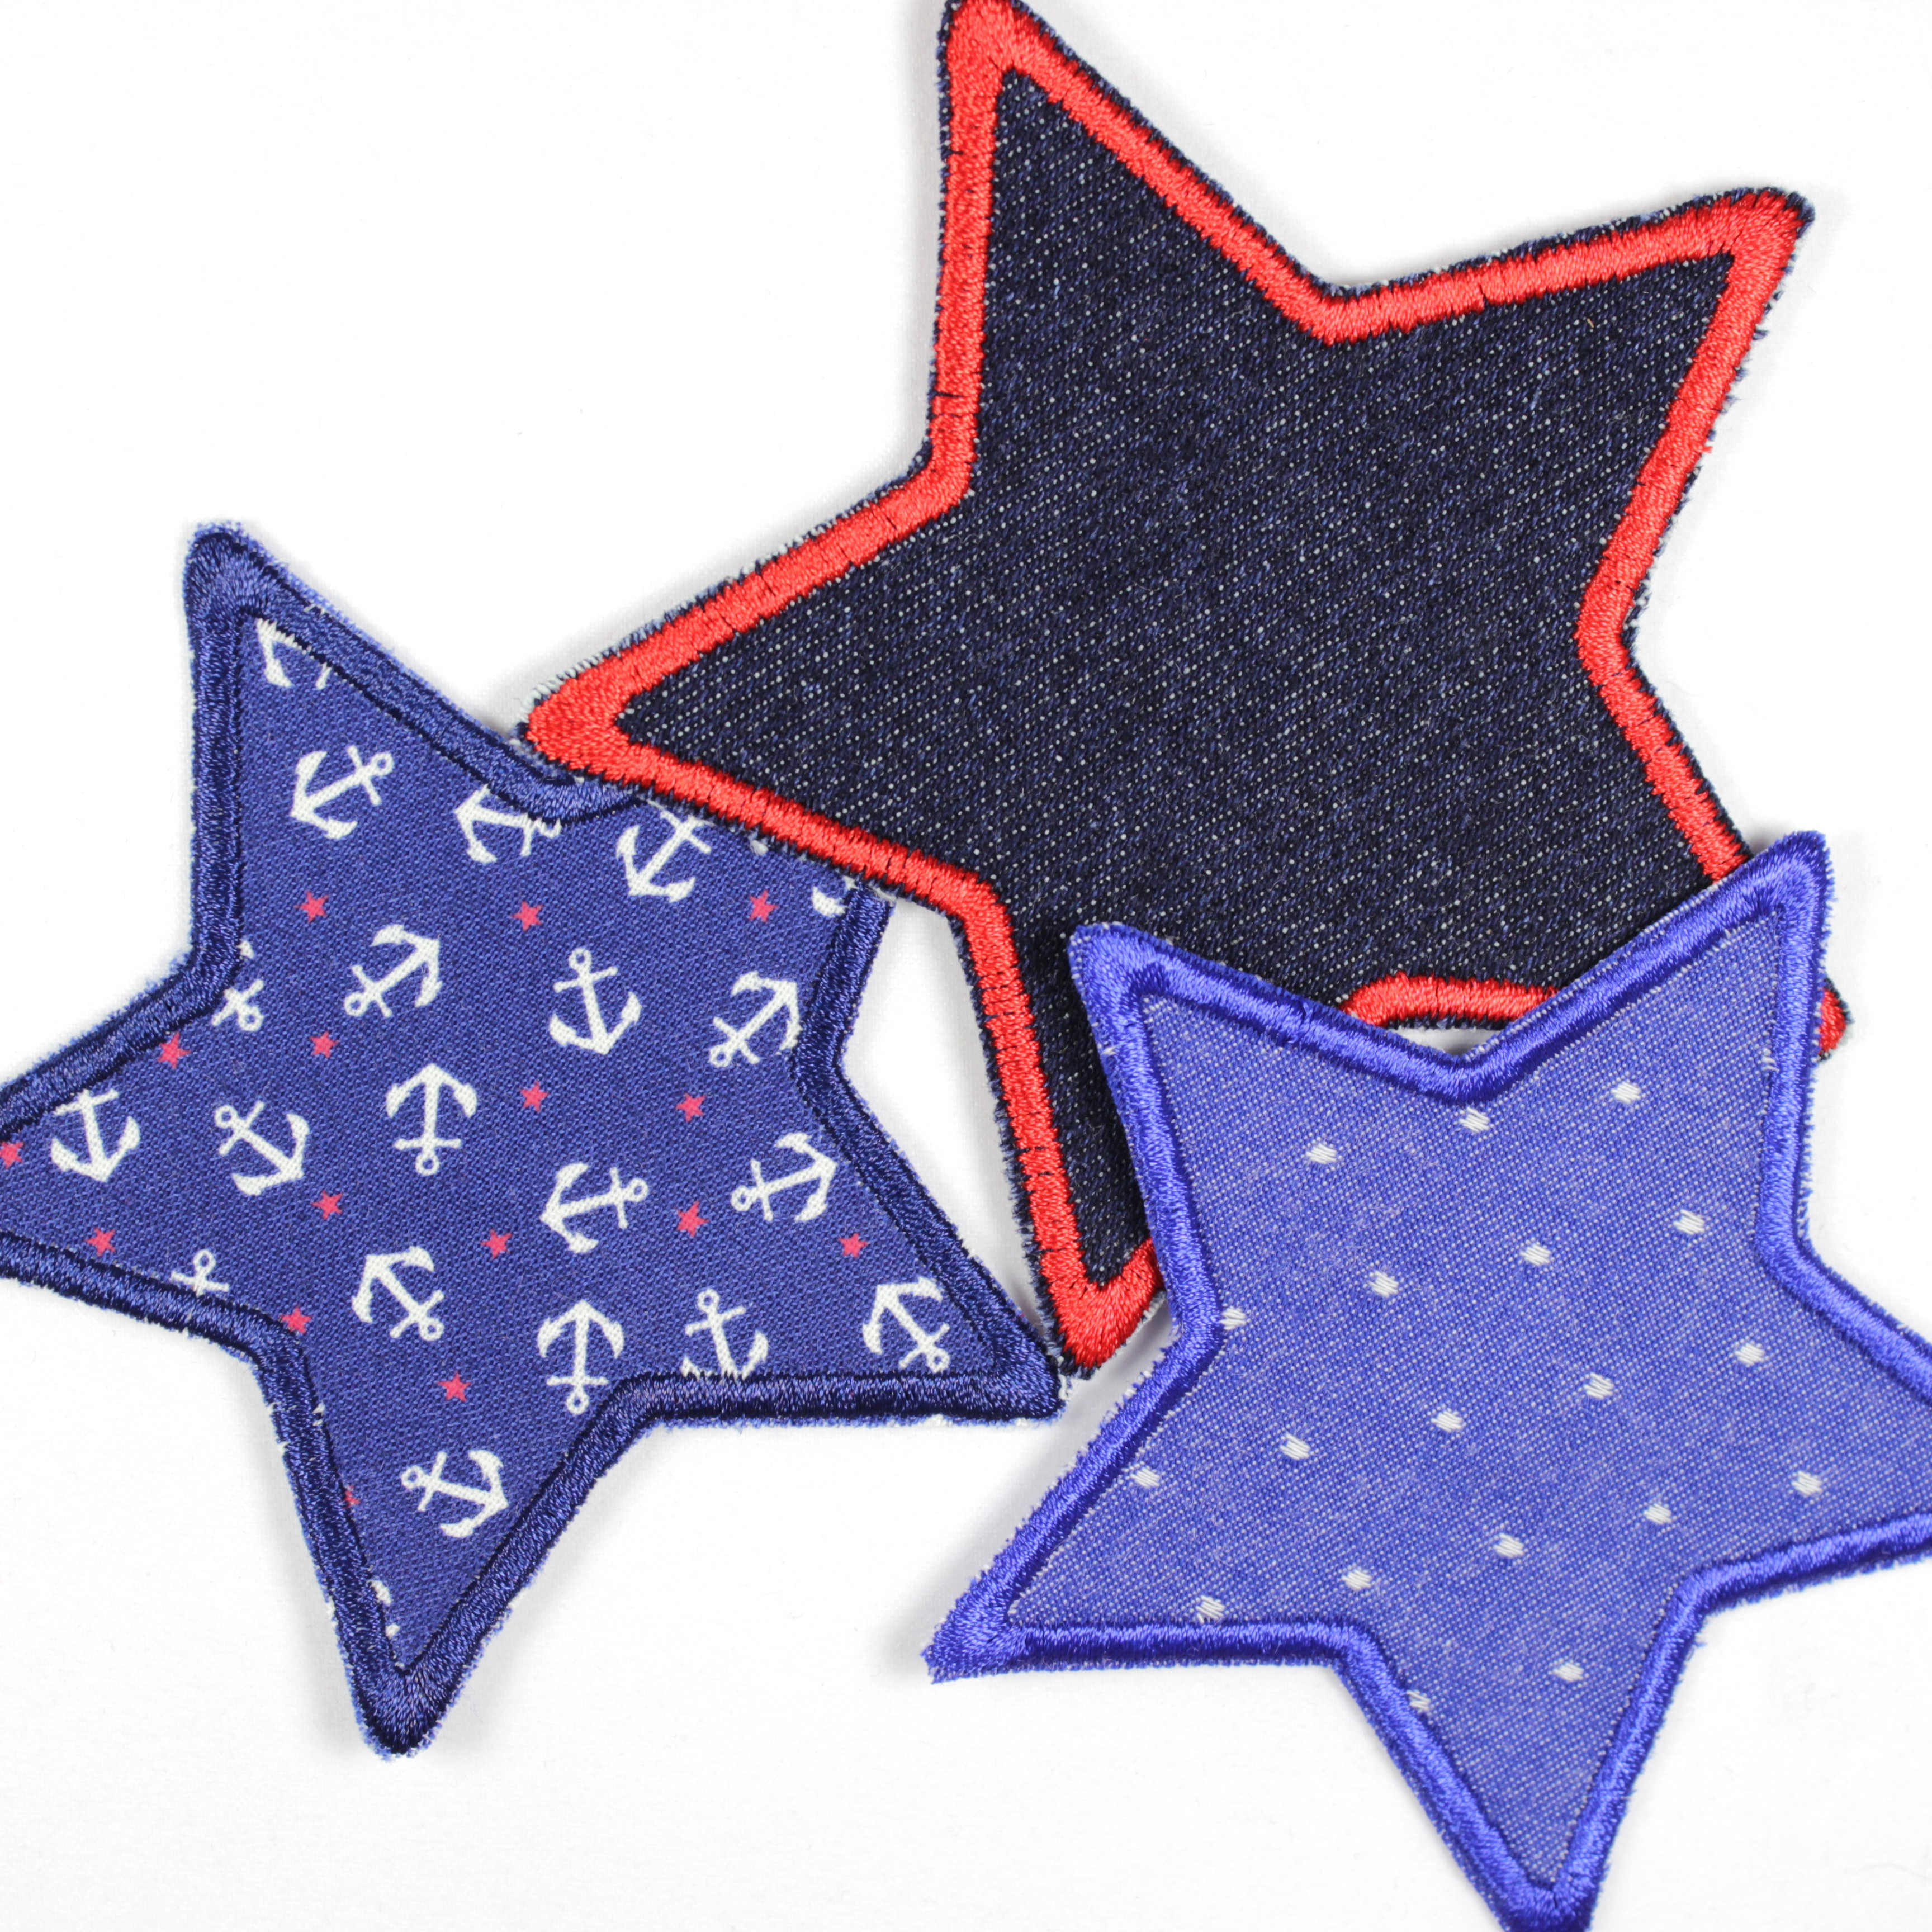 Flickli - the patch! Jeans star blue and red trim